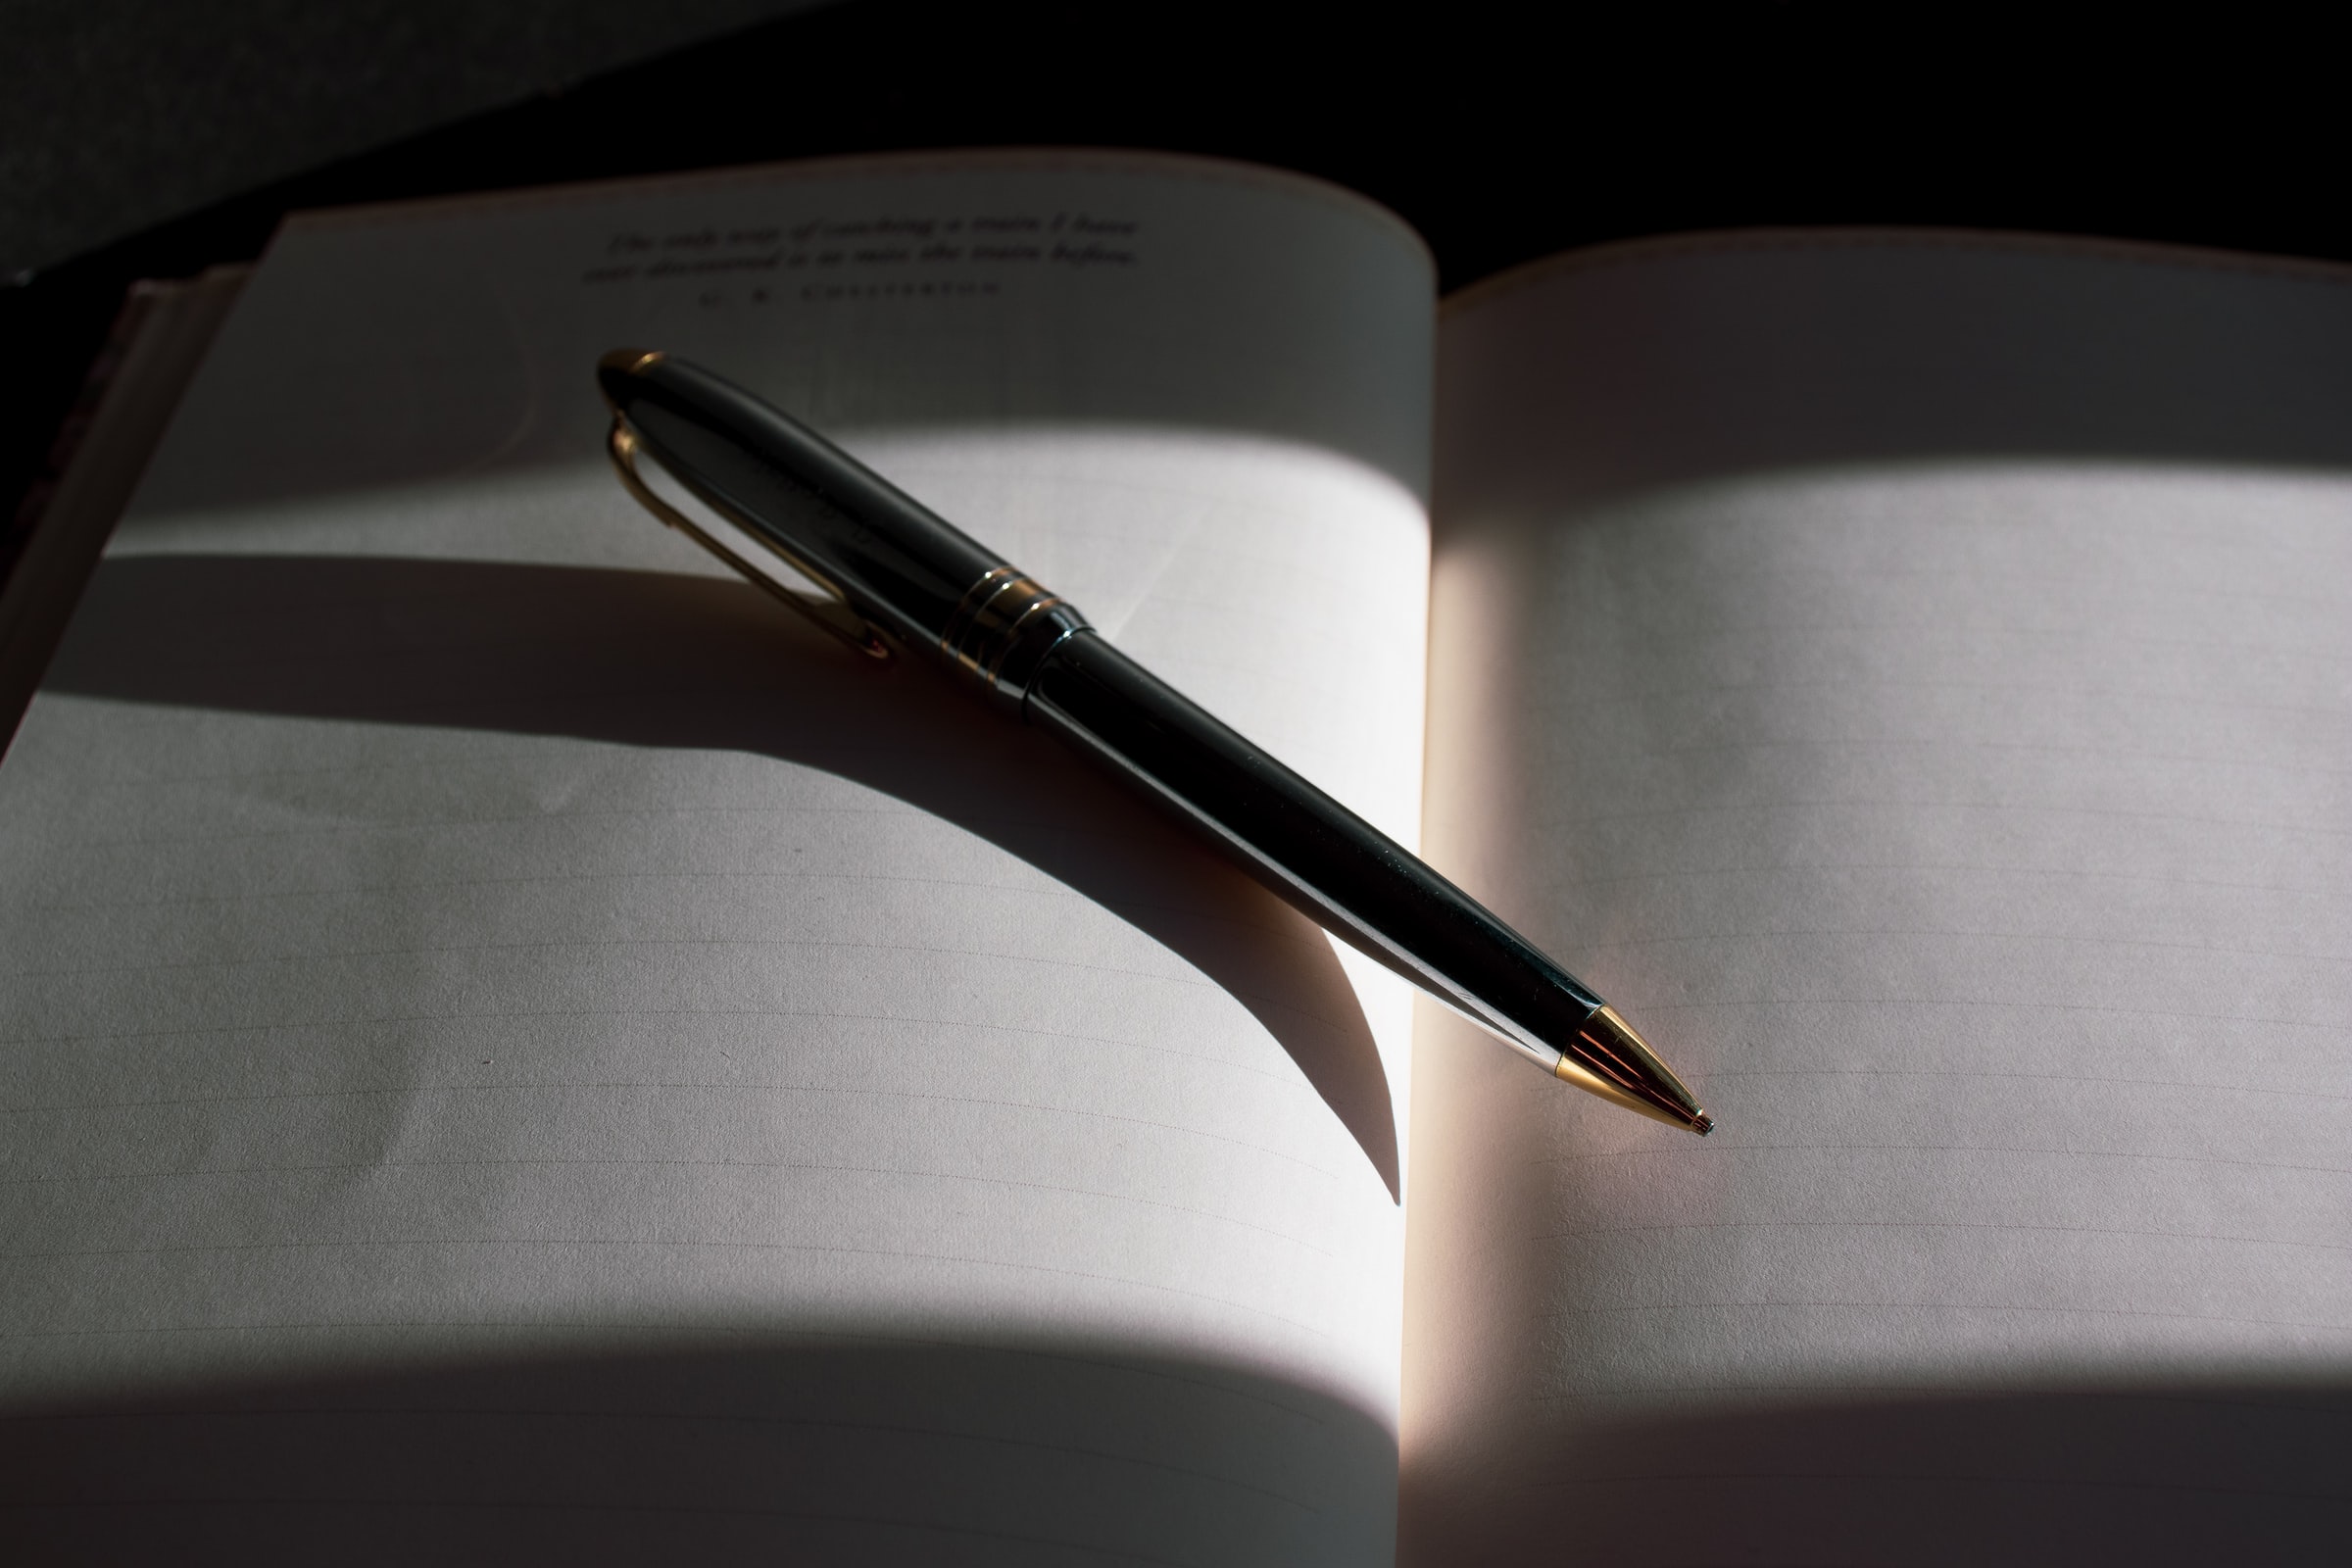 How to Use Journaling to Cope With PTSD